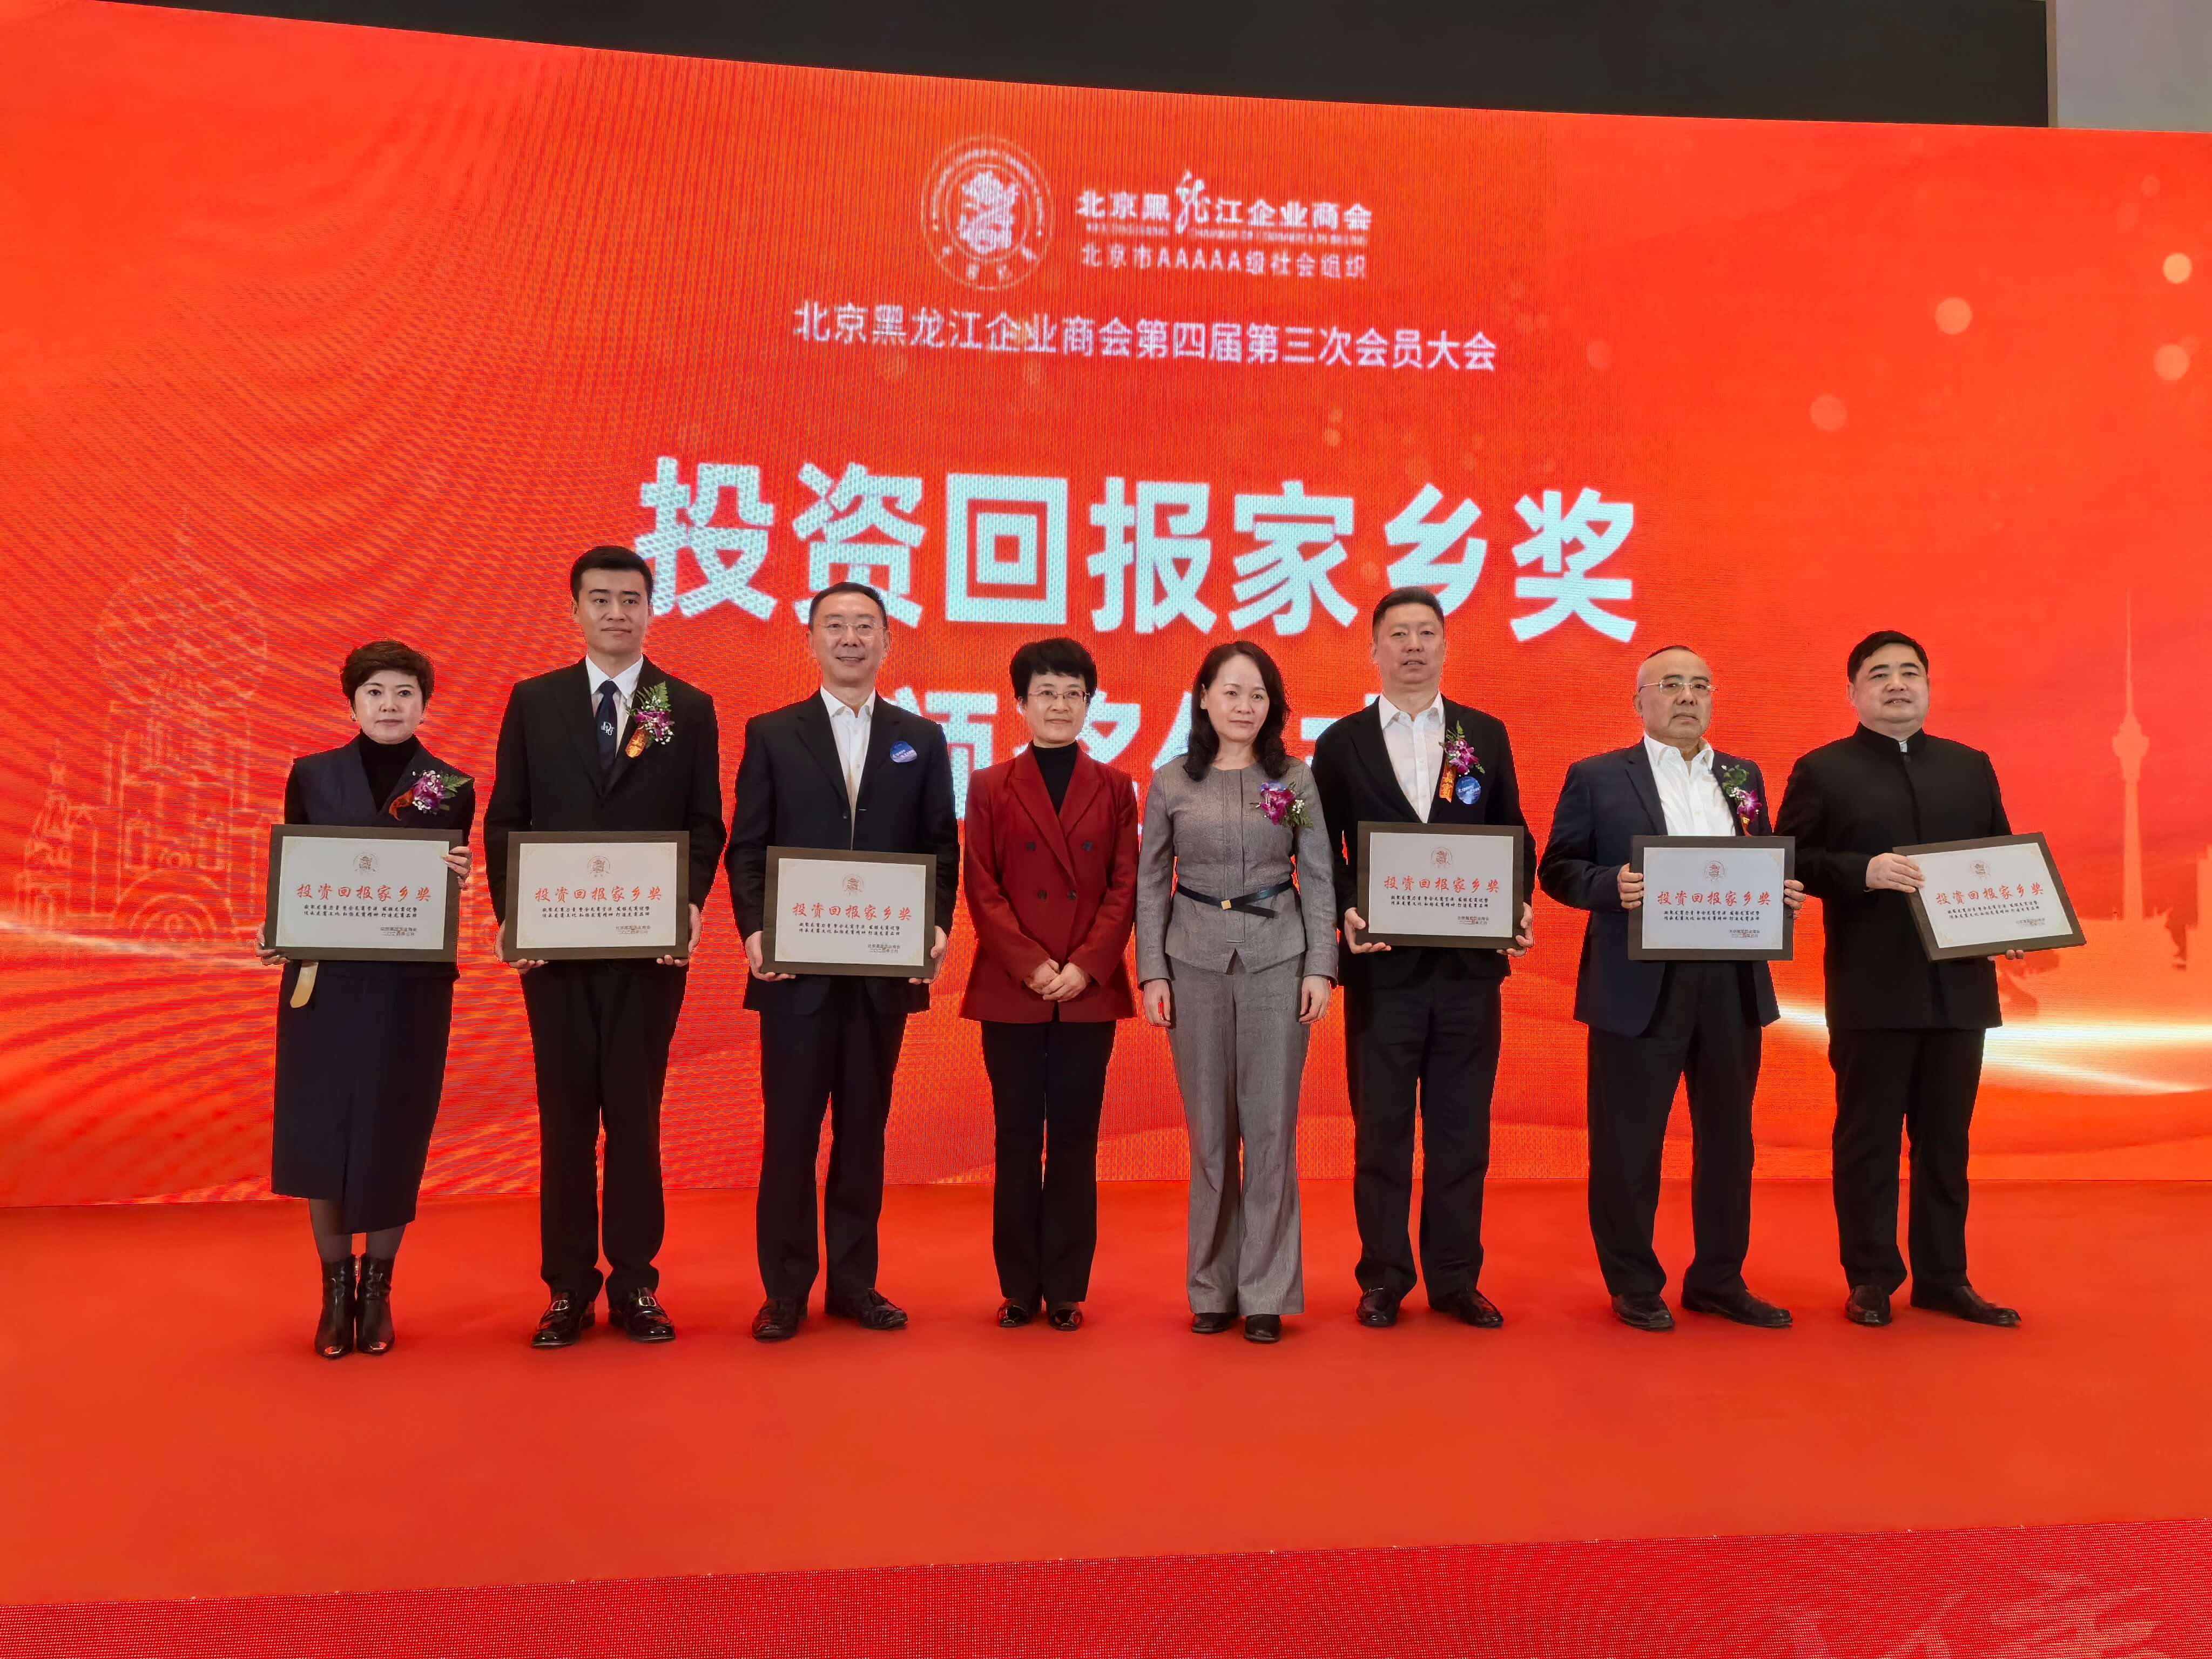 CHINAYONG Group At The Fourth-Session Of Third-Round Member Conference Of Heilongjiang Enterprise Chamber of Commerce in Beijing Received The "Award Of Investment for Hometown"